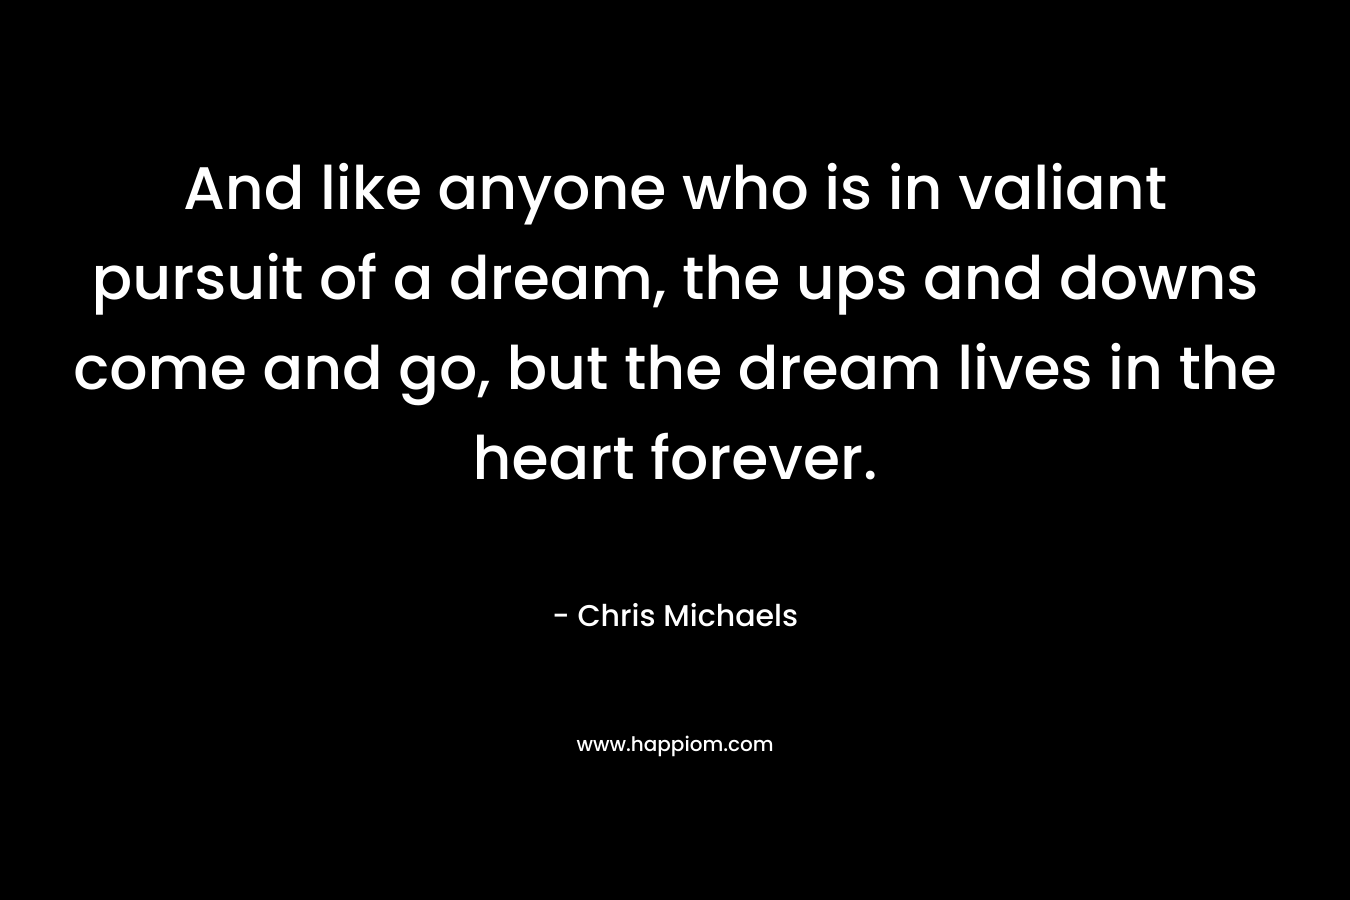 And like anyone who is in valiant pursuit of a dream, the ups and downs come and go, but the dream lives in the heart forever.